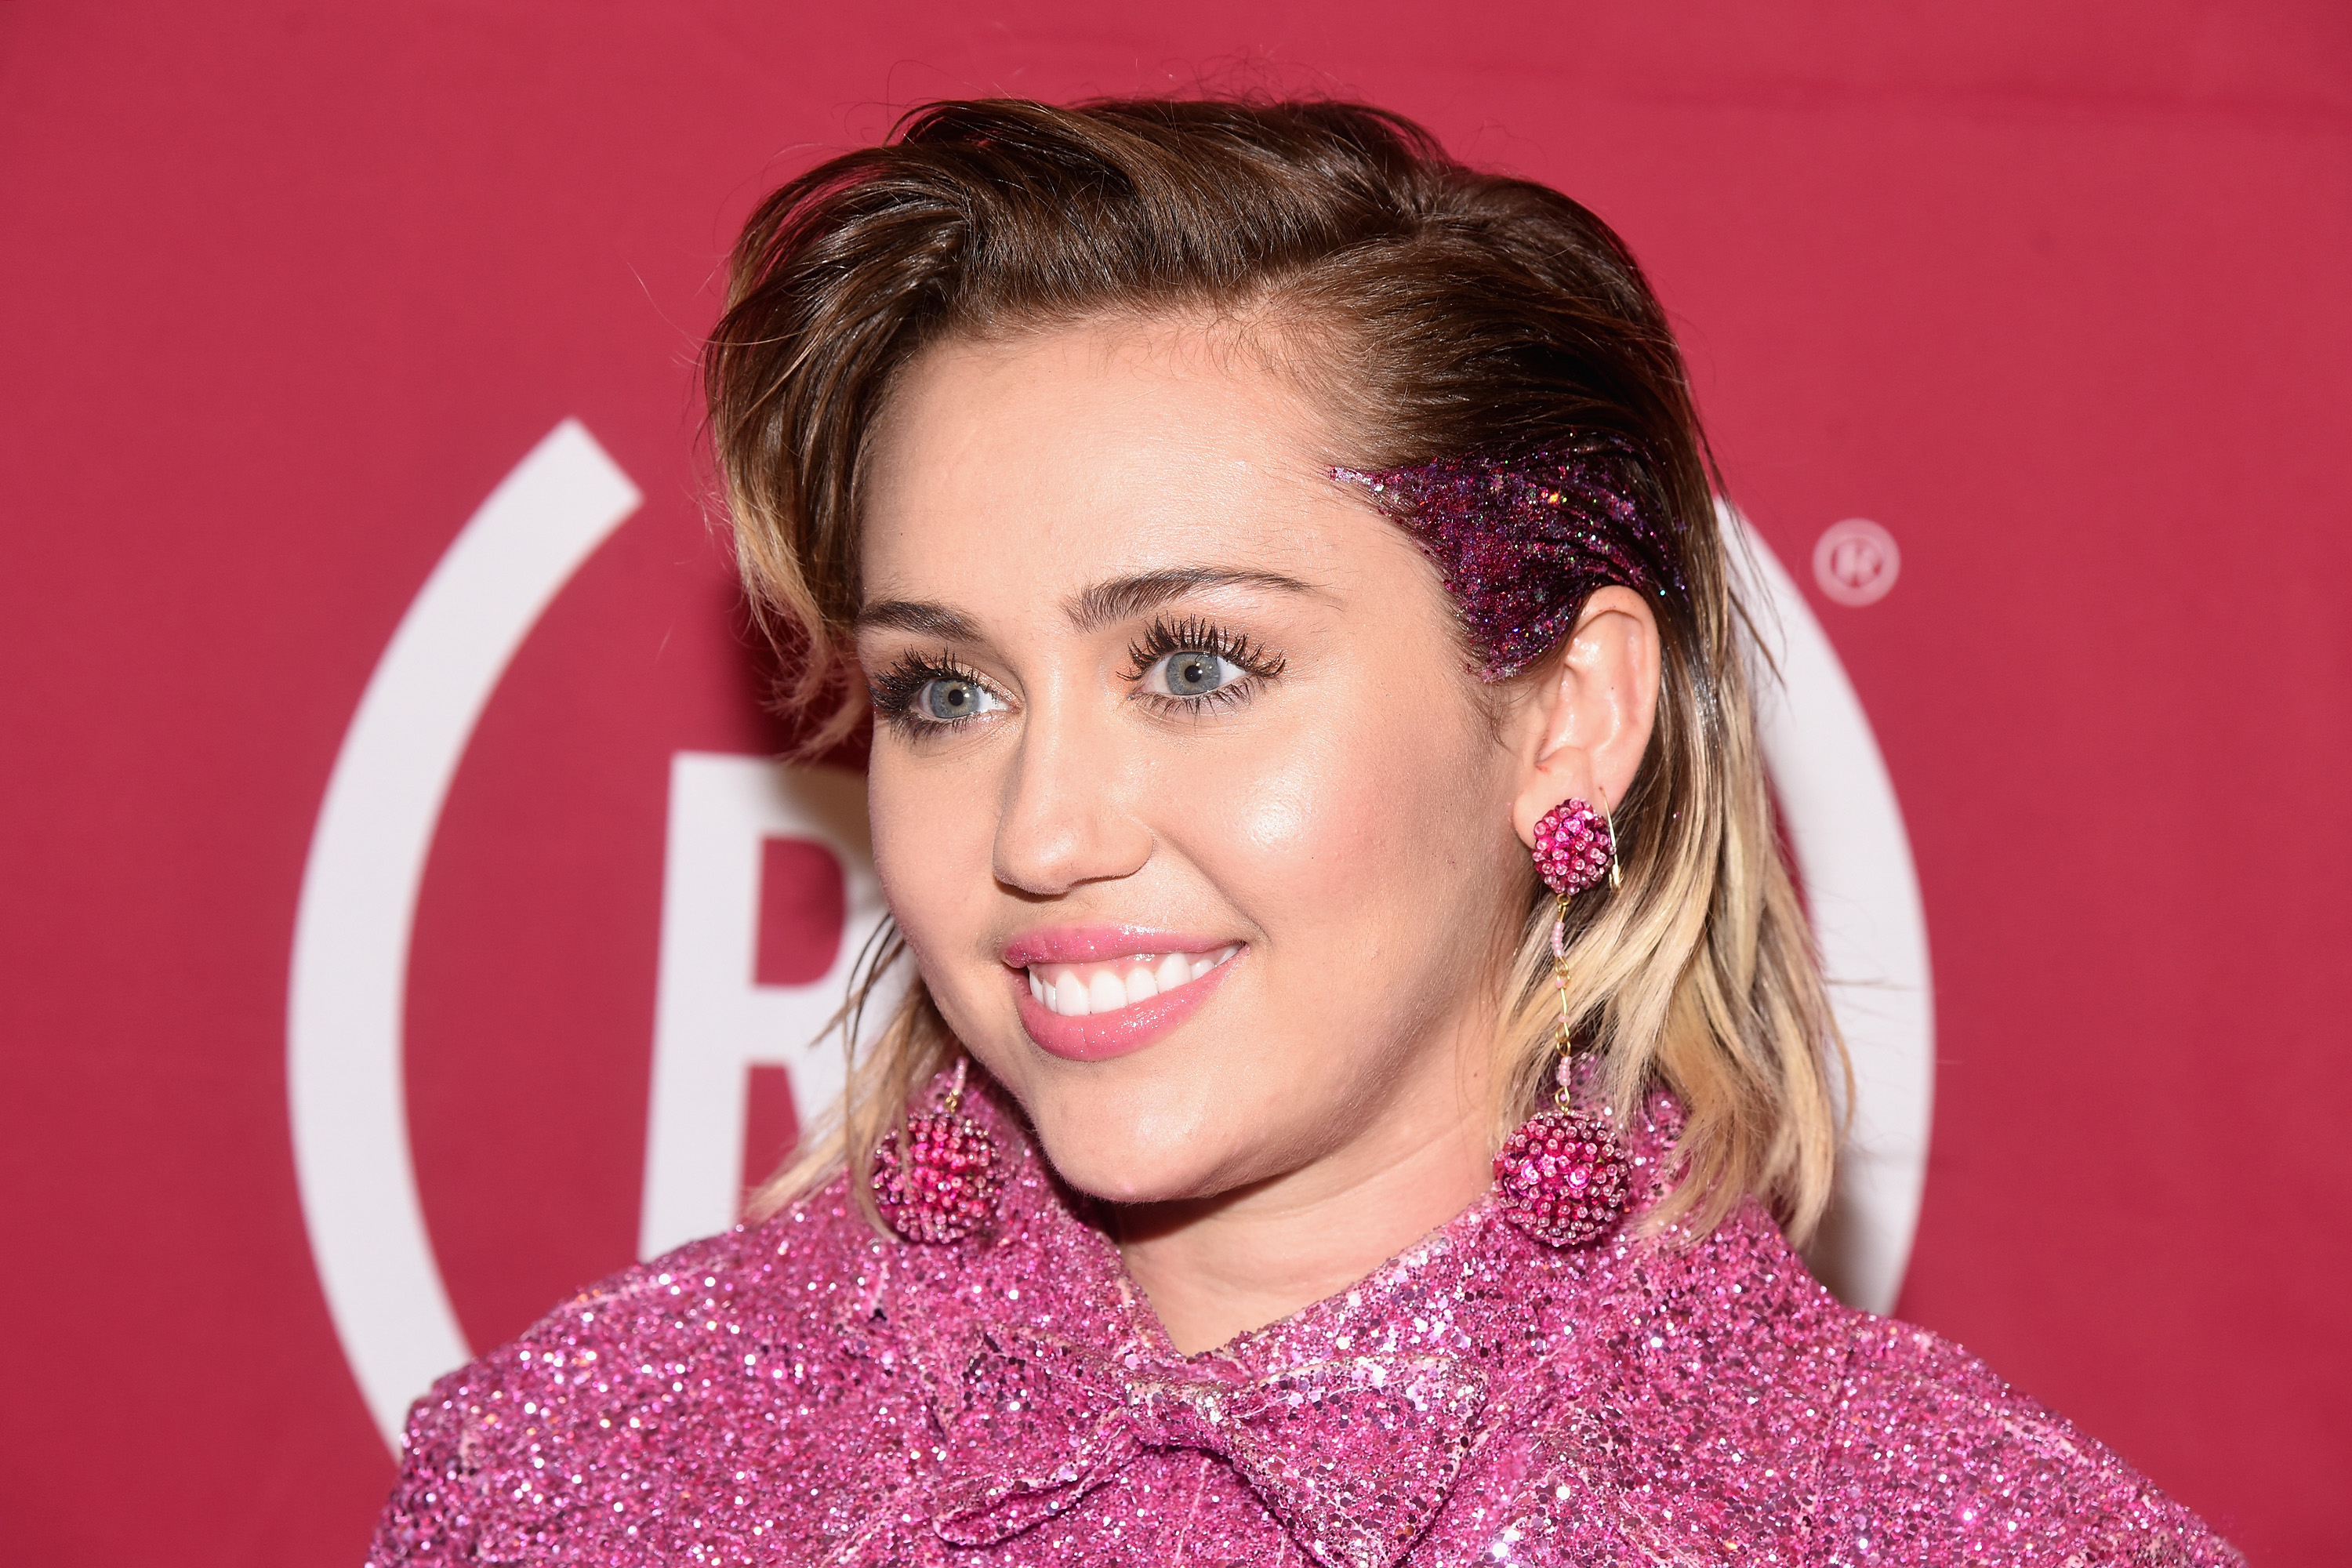 Miley Cyrus. Billy Ray Cyrus. How've Ya Been. Dueto. Cúsica Plus